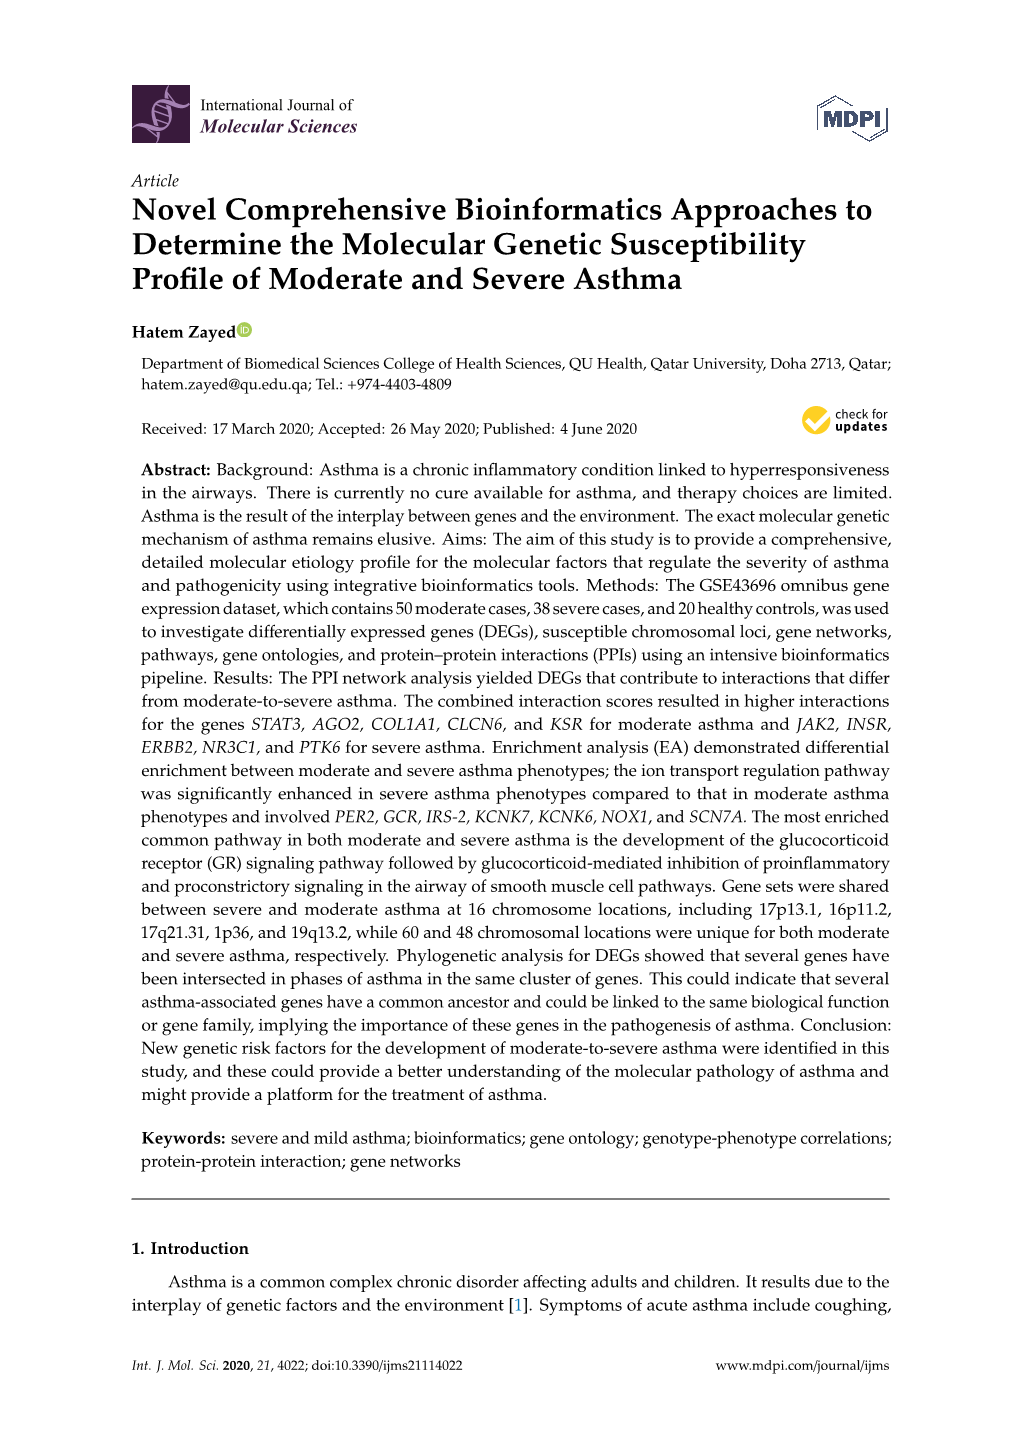 Novel Comprehensive Bioinformatics Approaches to Determine the Molecular Genetic Susceptibility Proﬁle of Moderate and Severe Asthma